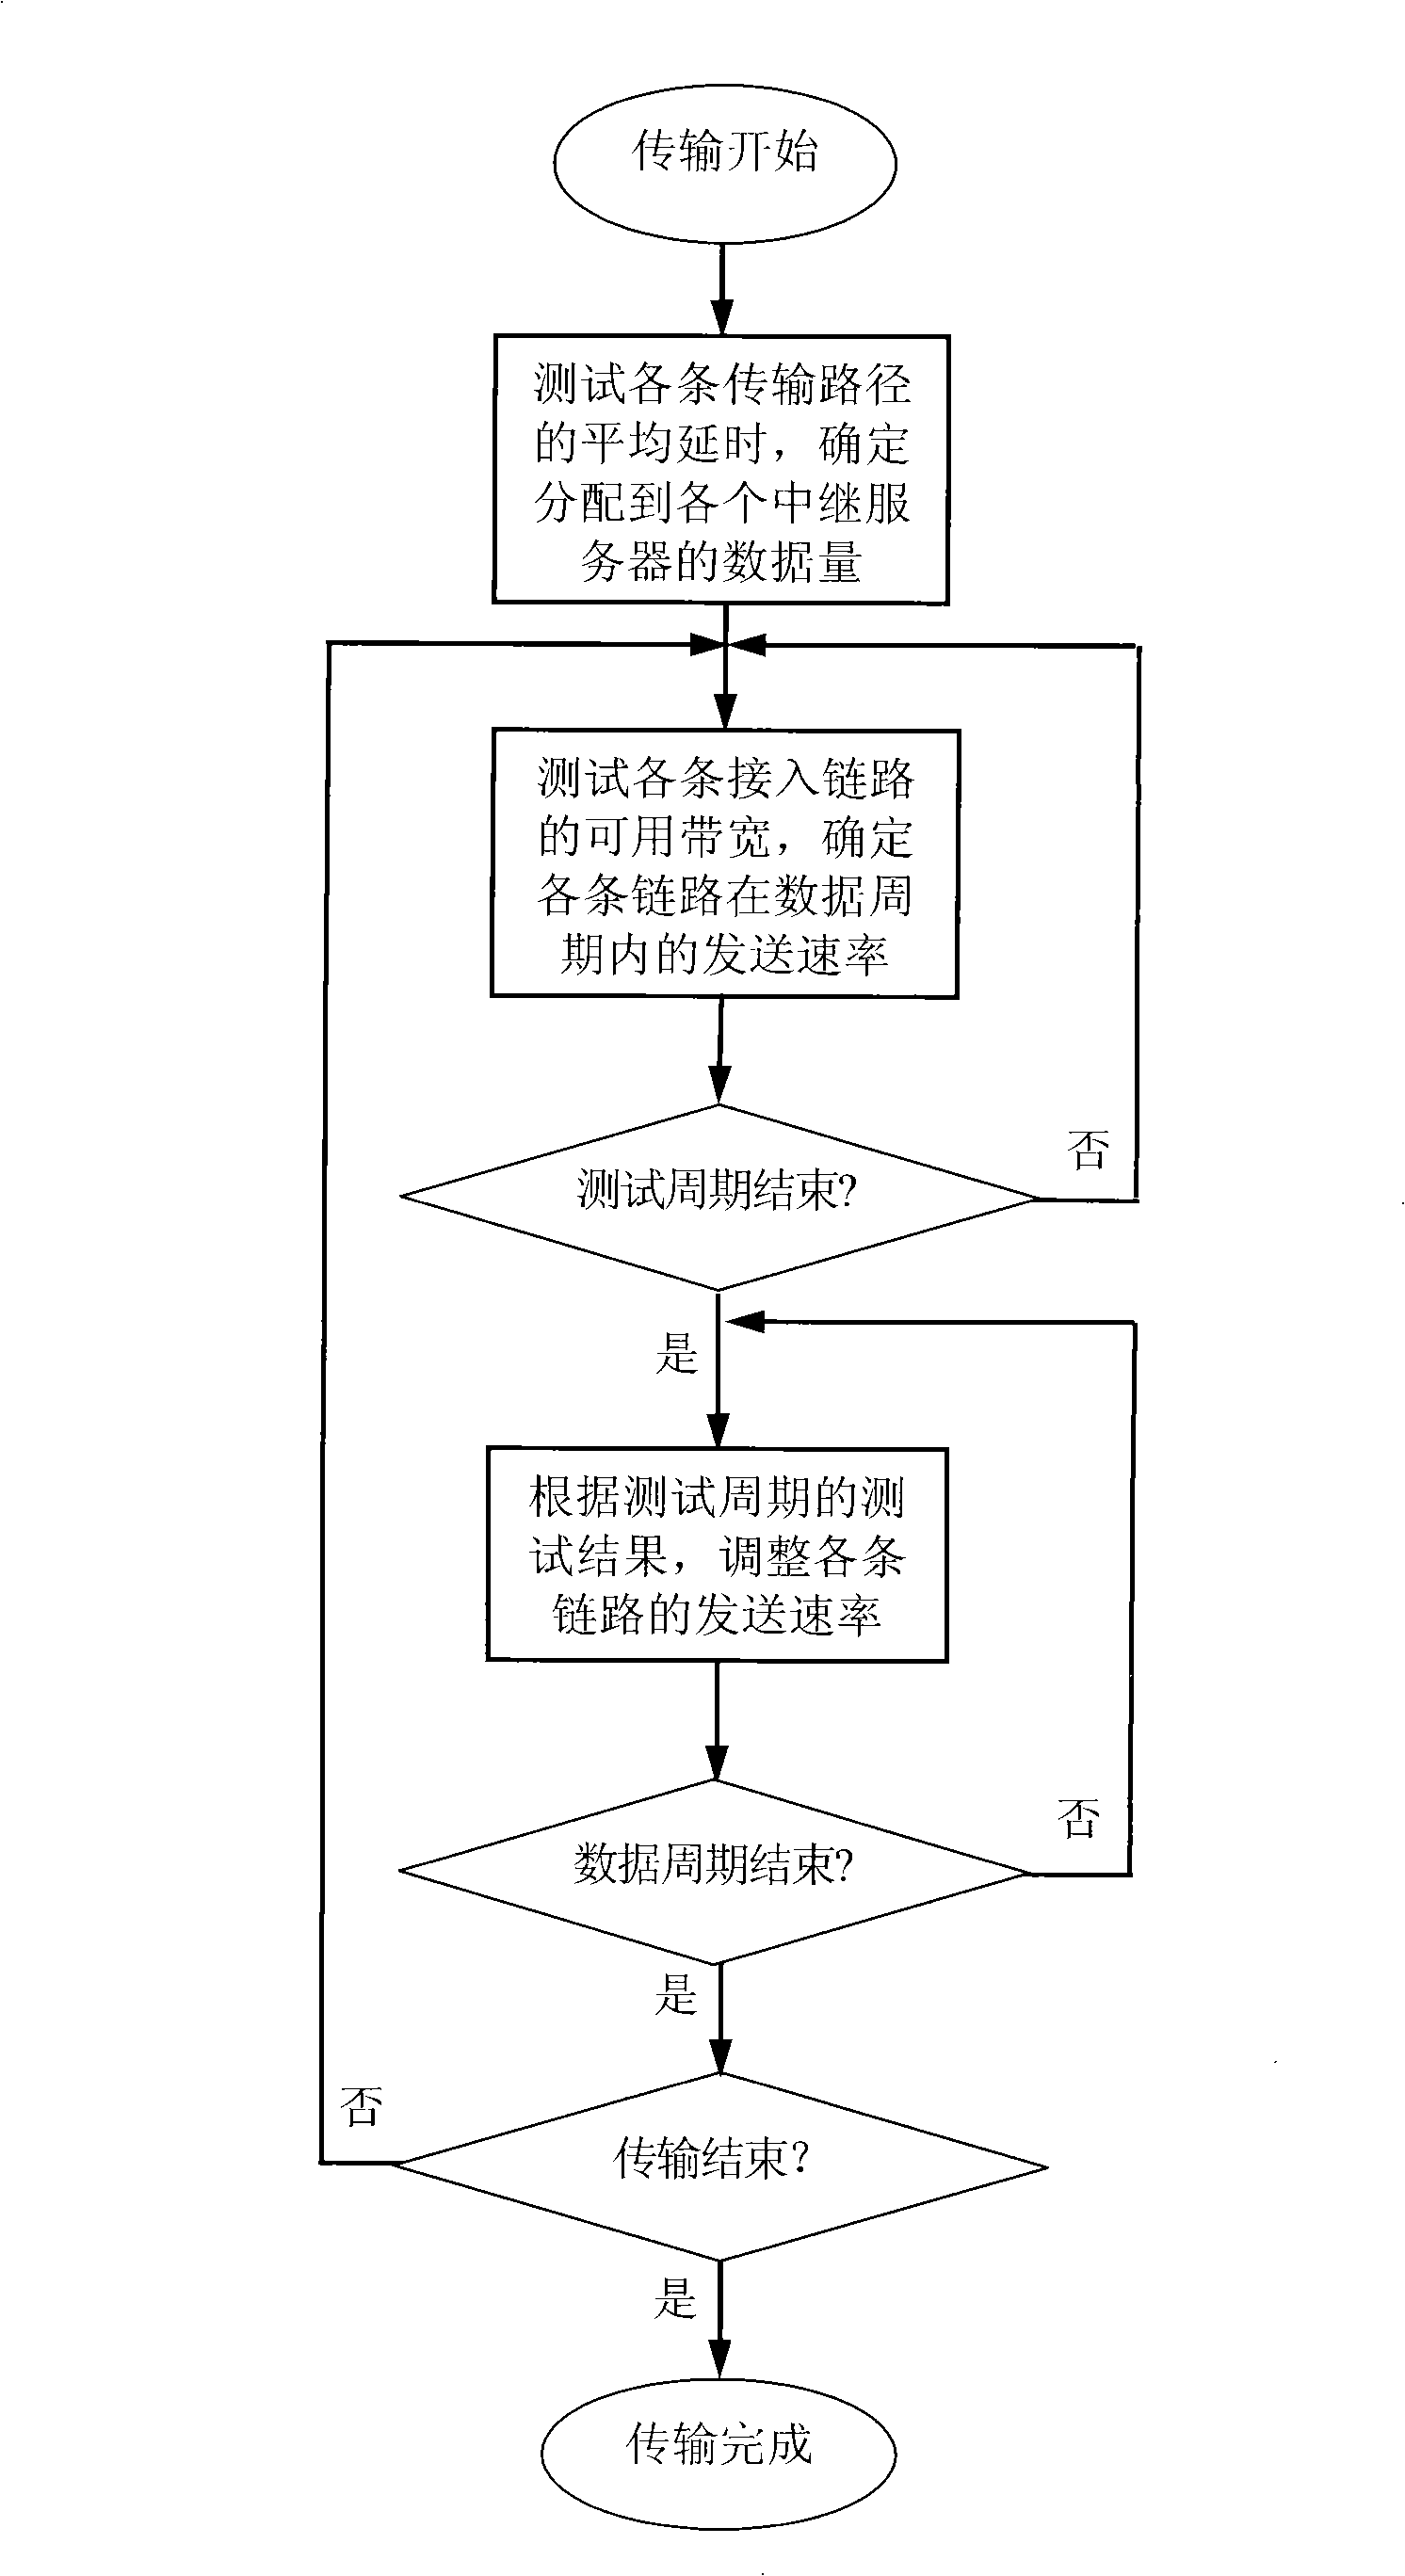 Multimedia data transmission method of concurrent access of multiple threads